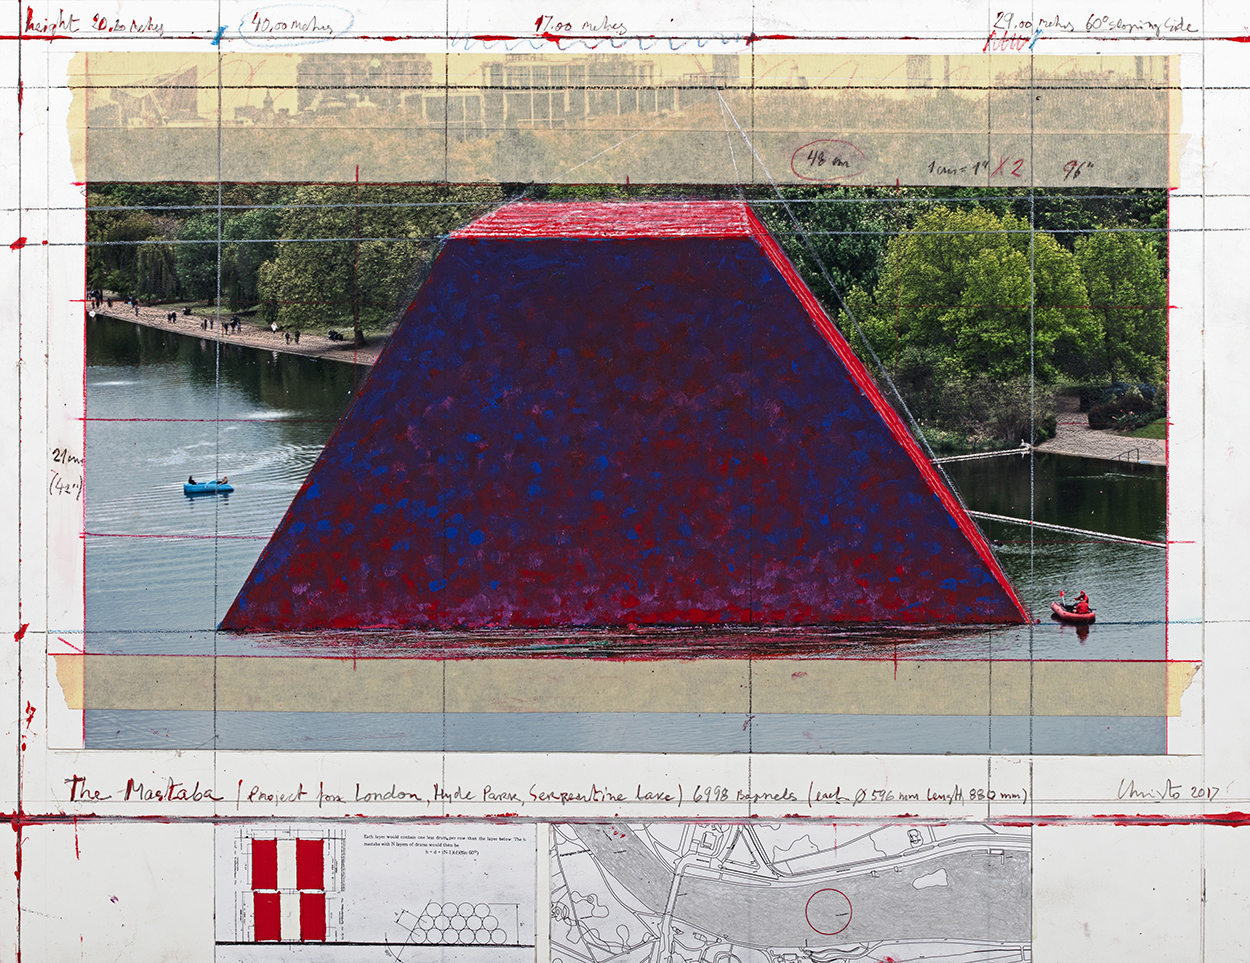 The London Mastaba - The Mastaba (Project for London, Hyde Park, Serpentine Lake) (2)